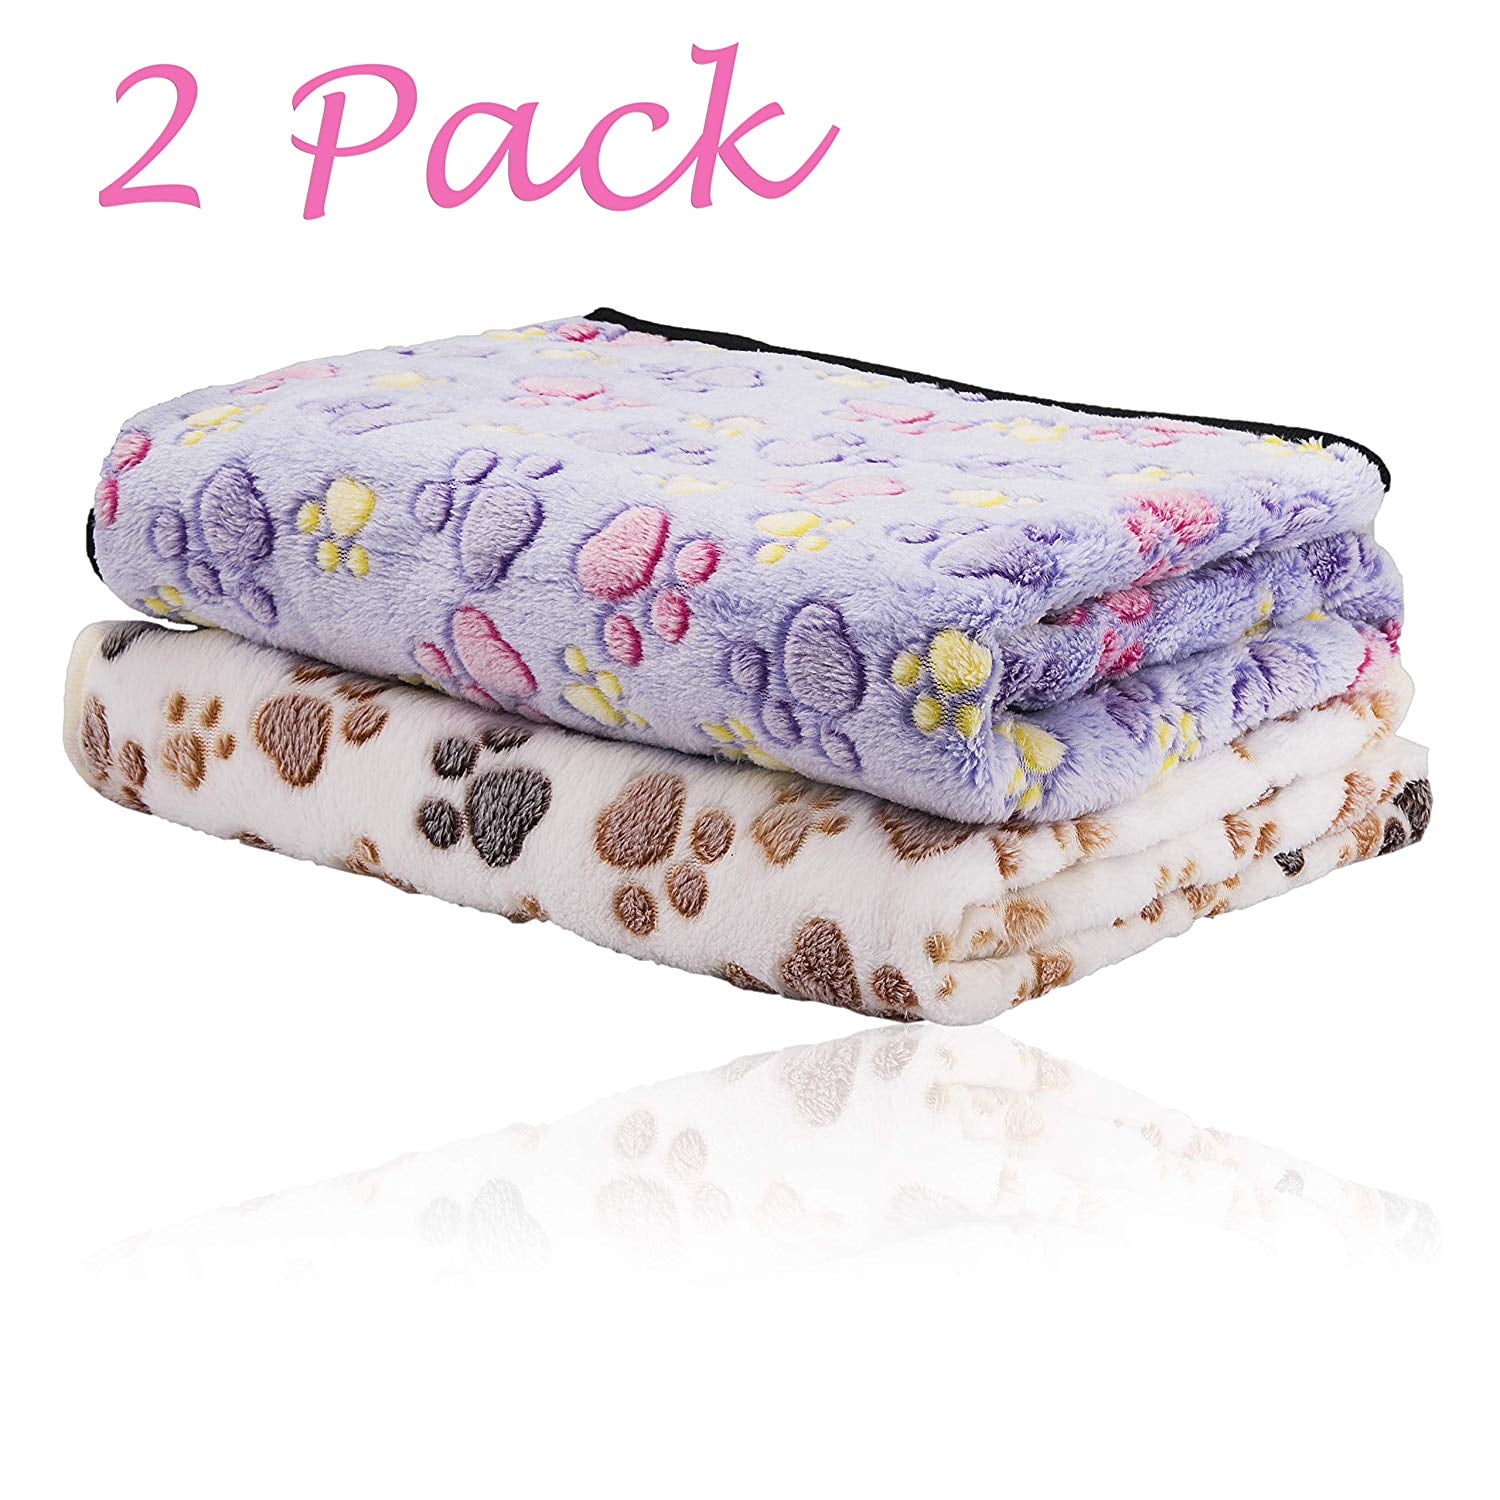 Large 76x104cm ITODA Fleece Dog Blankets Soft Breathable Washable Warm Beds Cover Sleep Bed Mat Cushion Fluffy Pet Throw for Dogs Puppy Cats Kittens